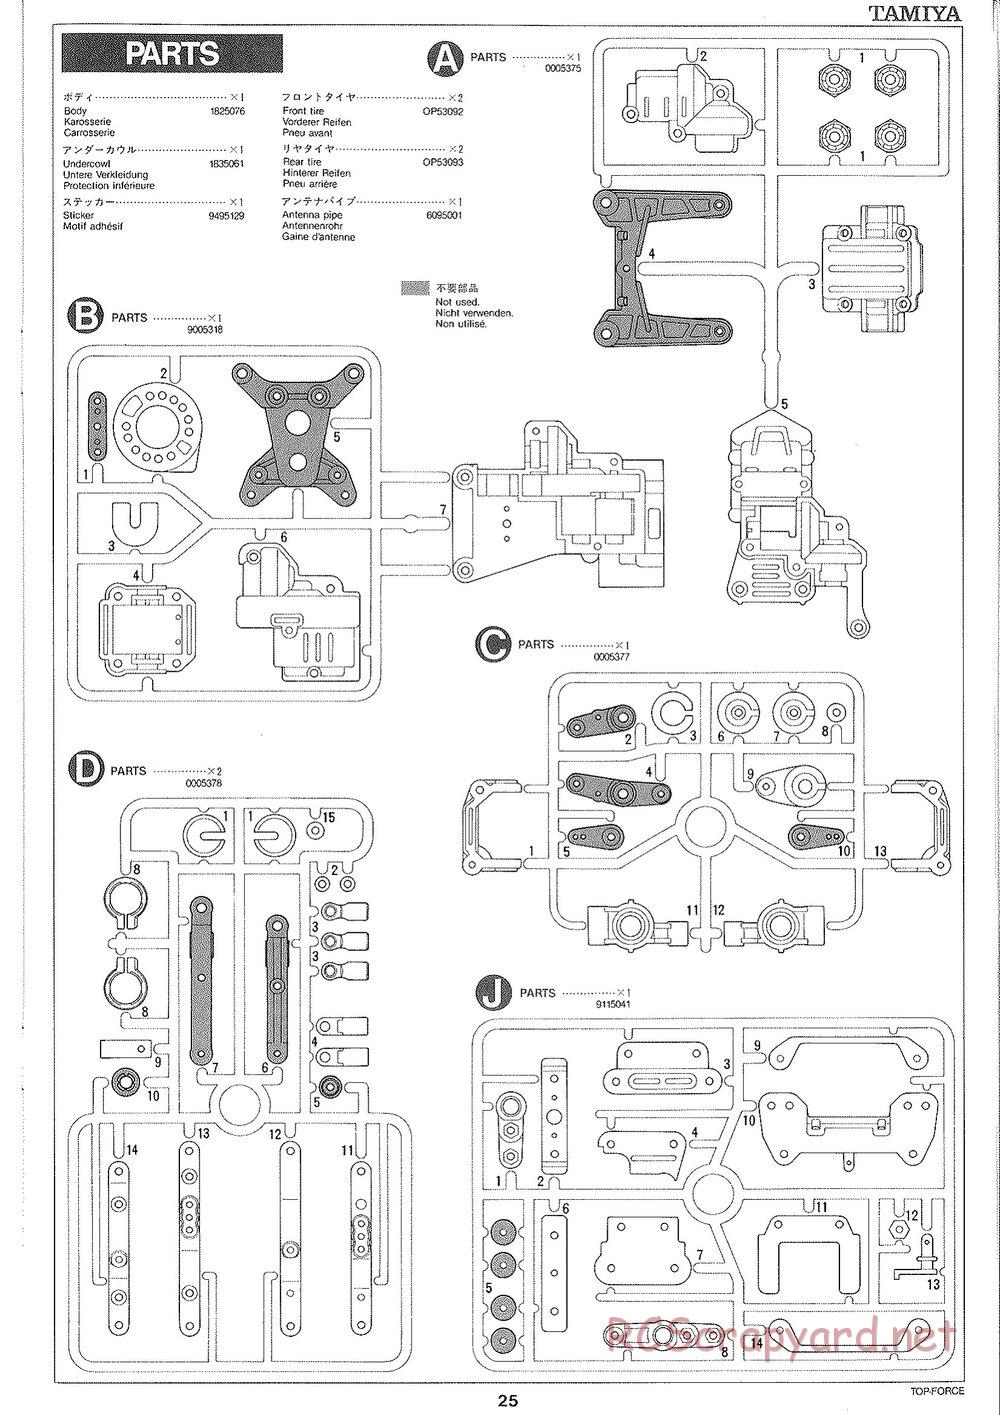 Tamiya - Top Force 2005 - DF-01 Chassis - Manual - Page 25